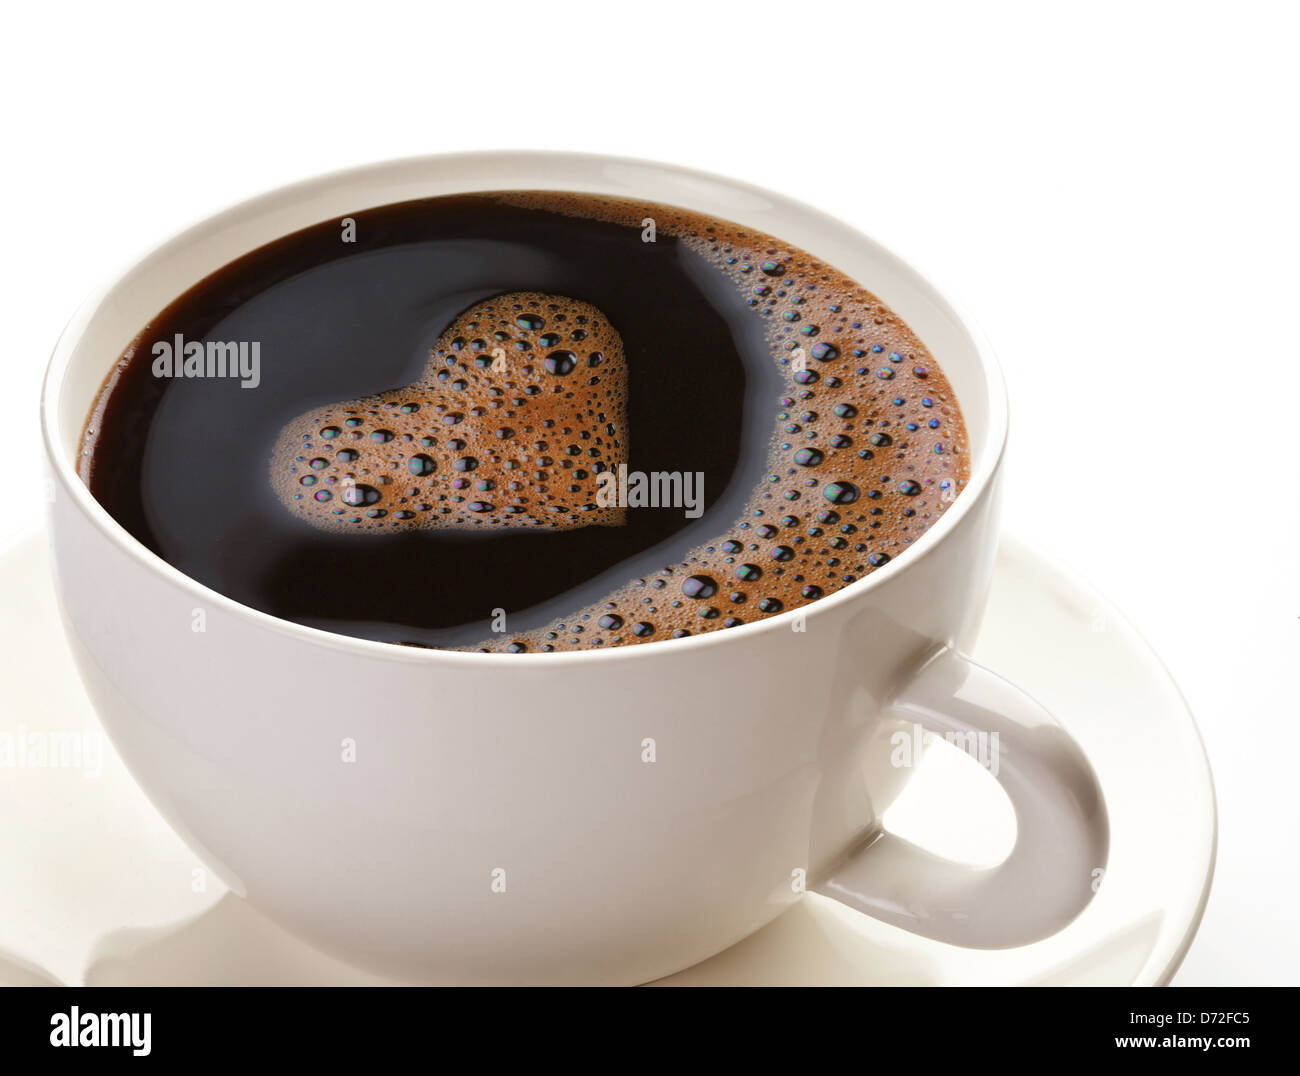 https://c8.alamy.com/comp/D72FC5/coffee-cup-a-white-background-foam-in-the-form-of-the-heart-D72FC5.jpg